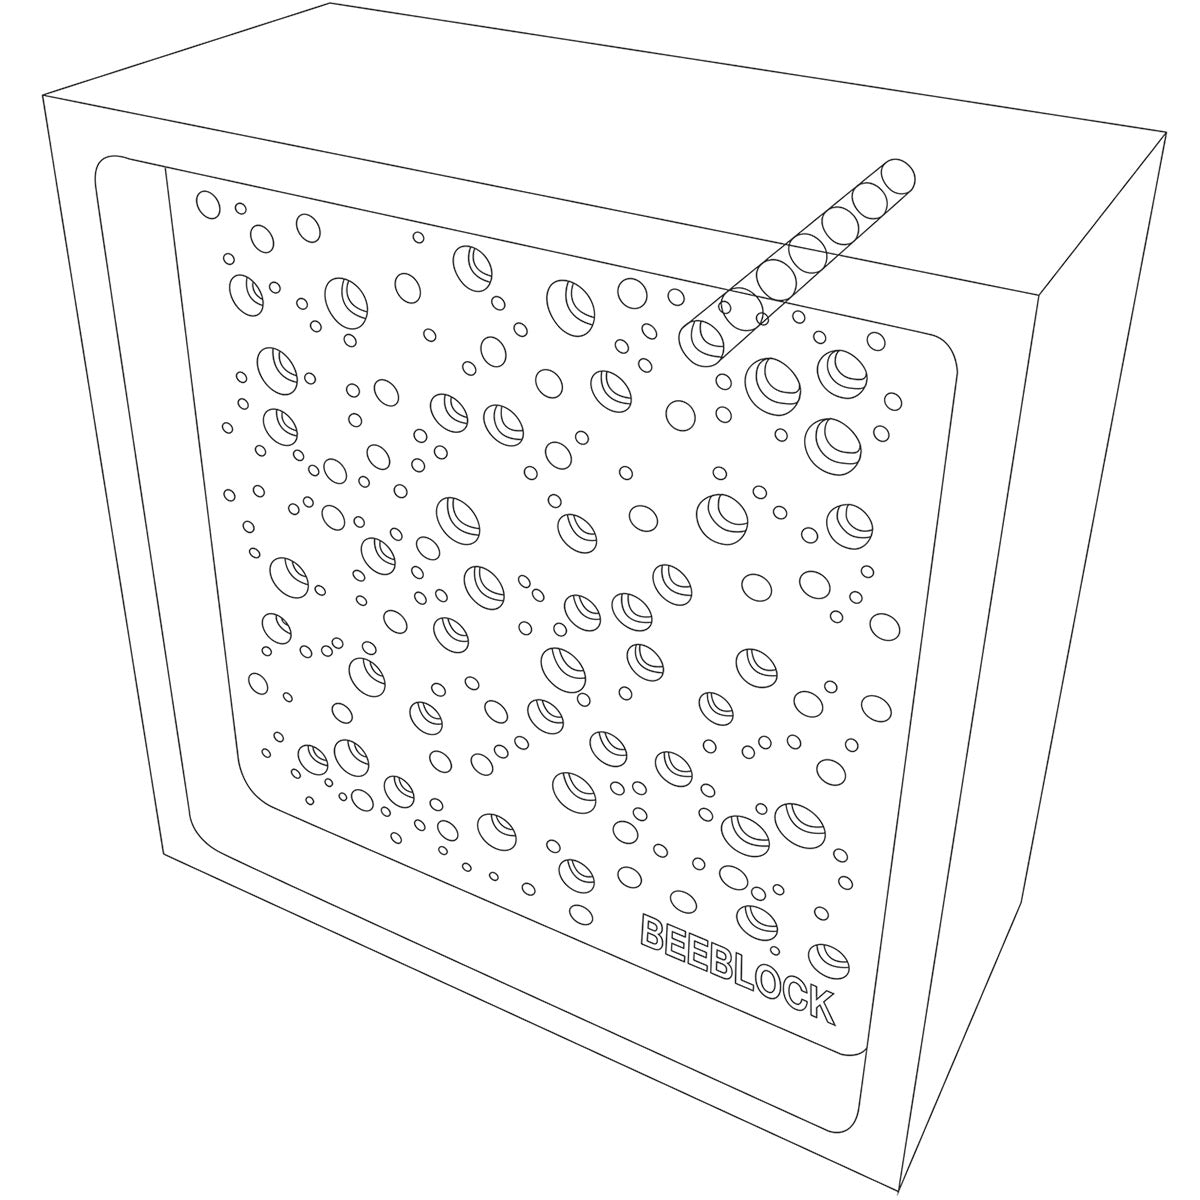 illustration of how the bees block works